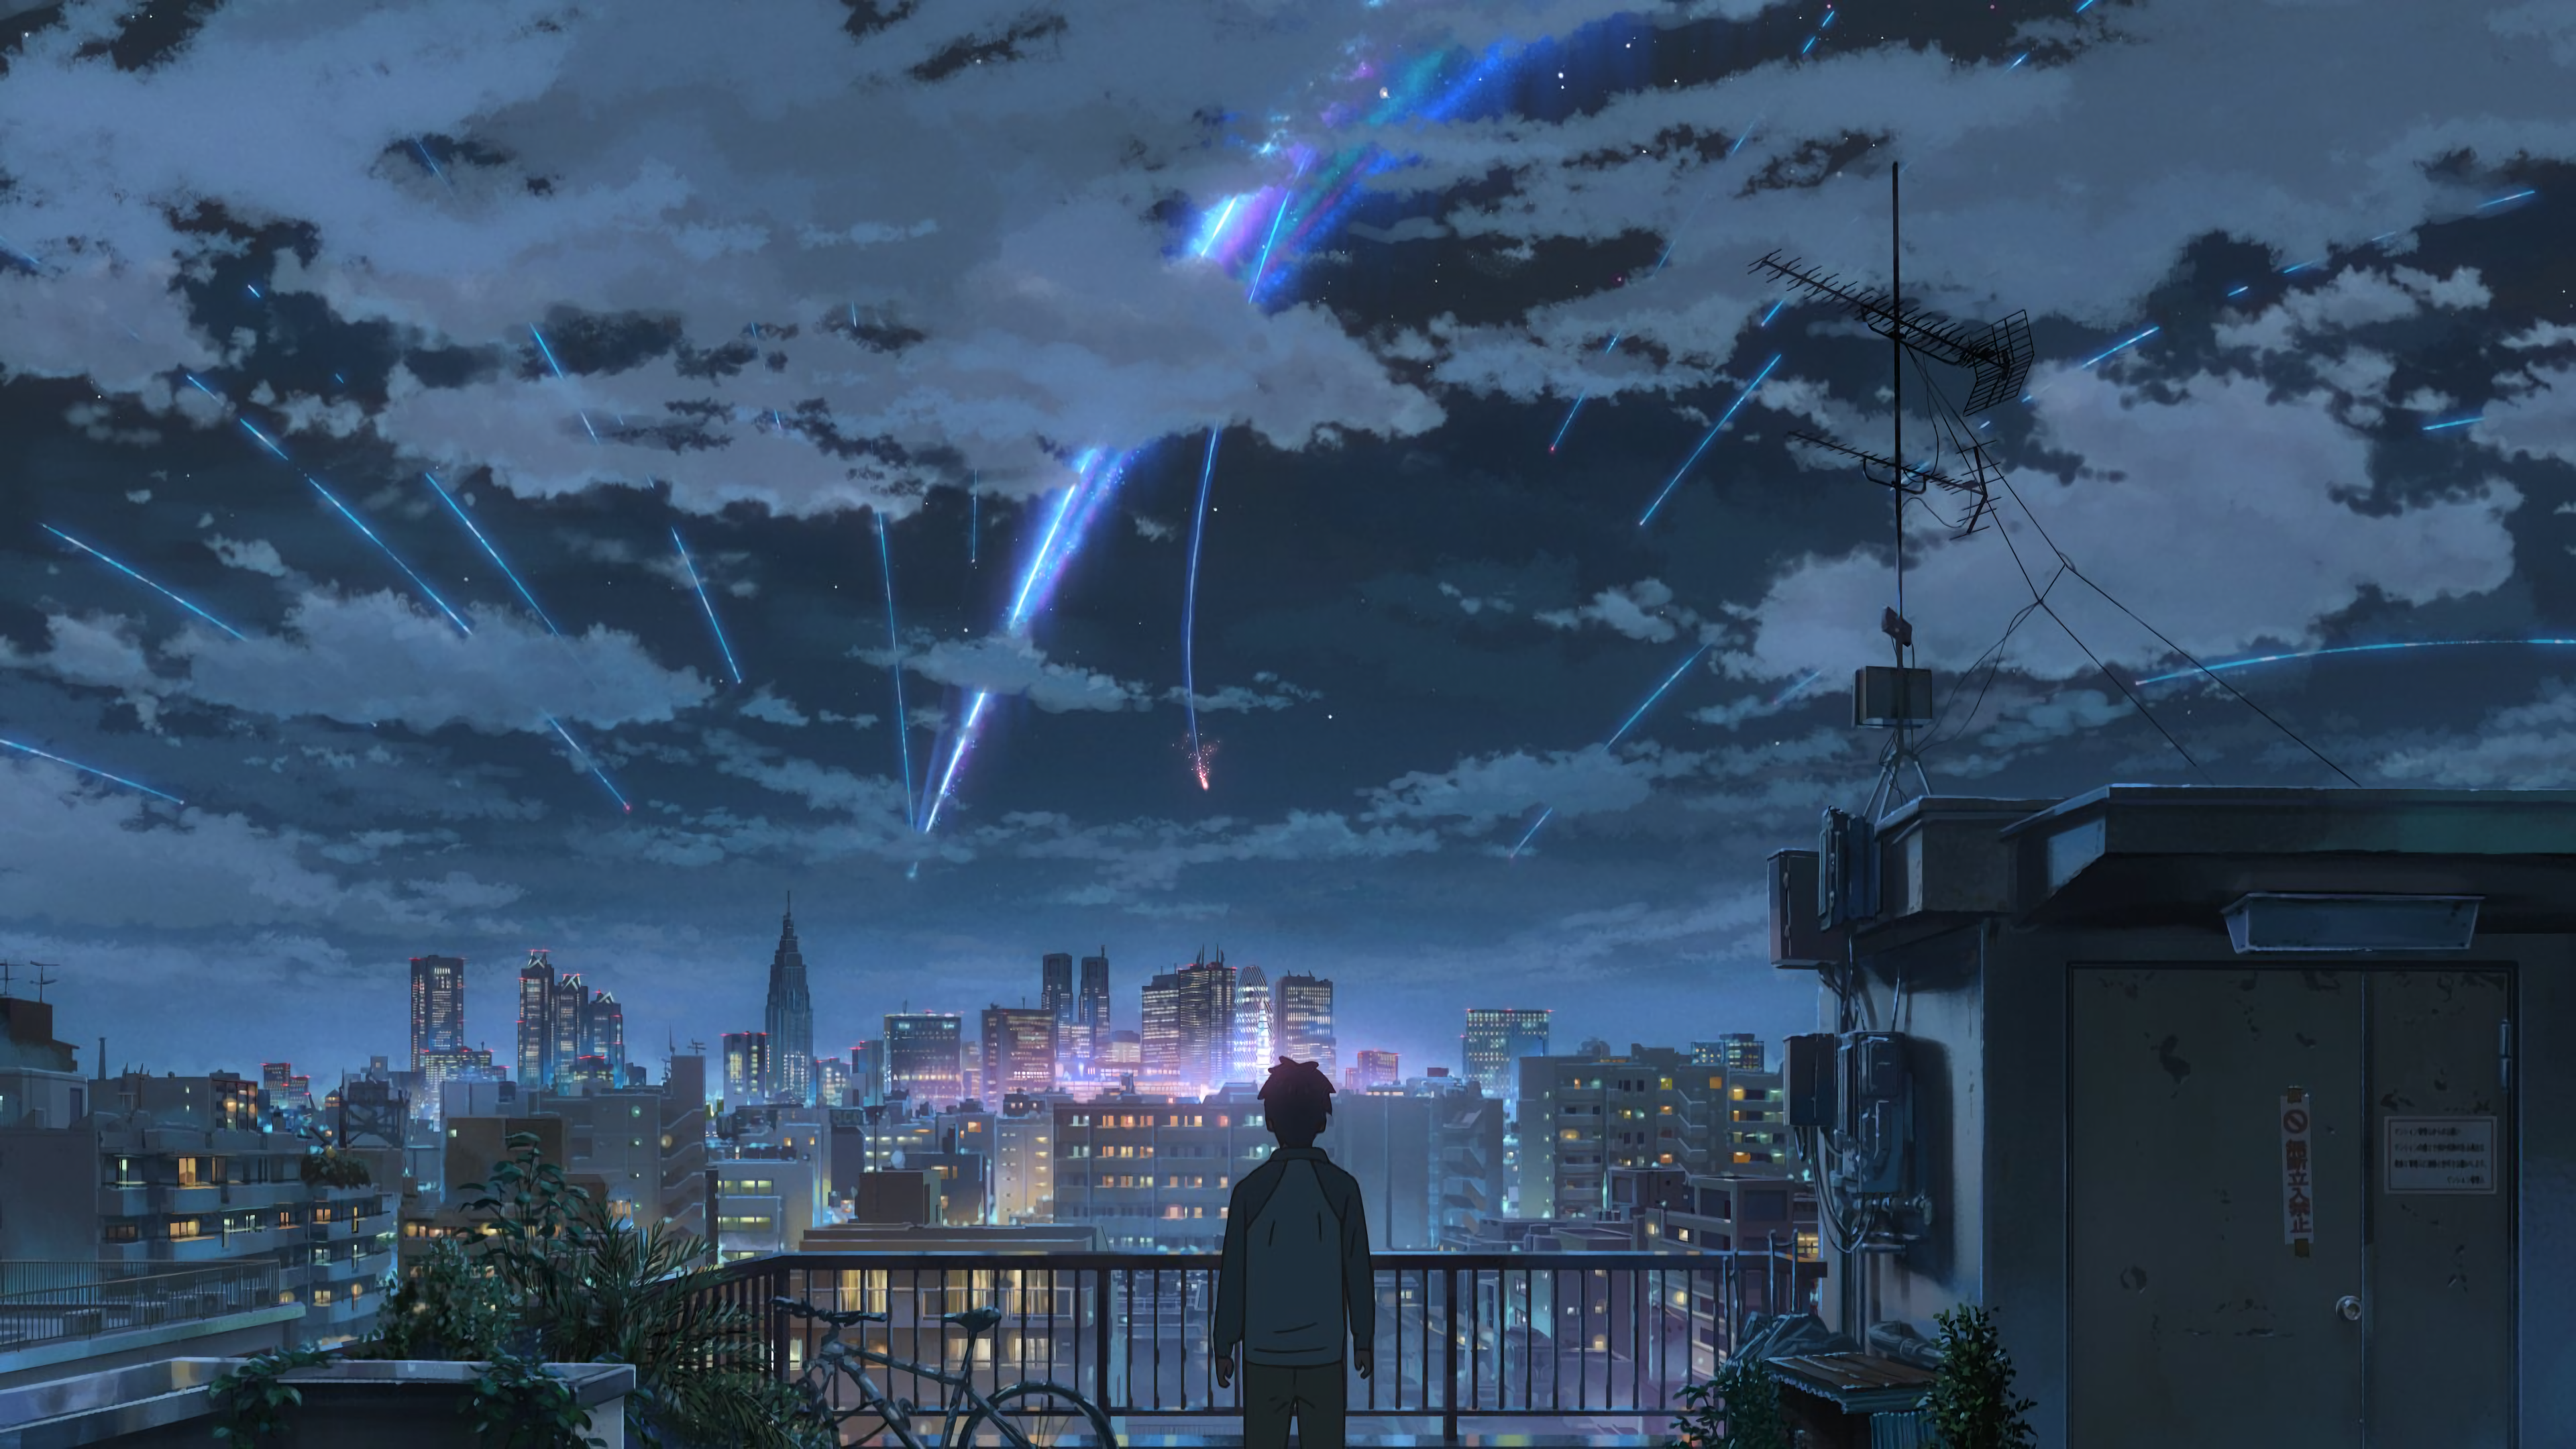 Your Name. 4K HDR Trailer #2 